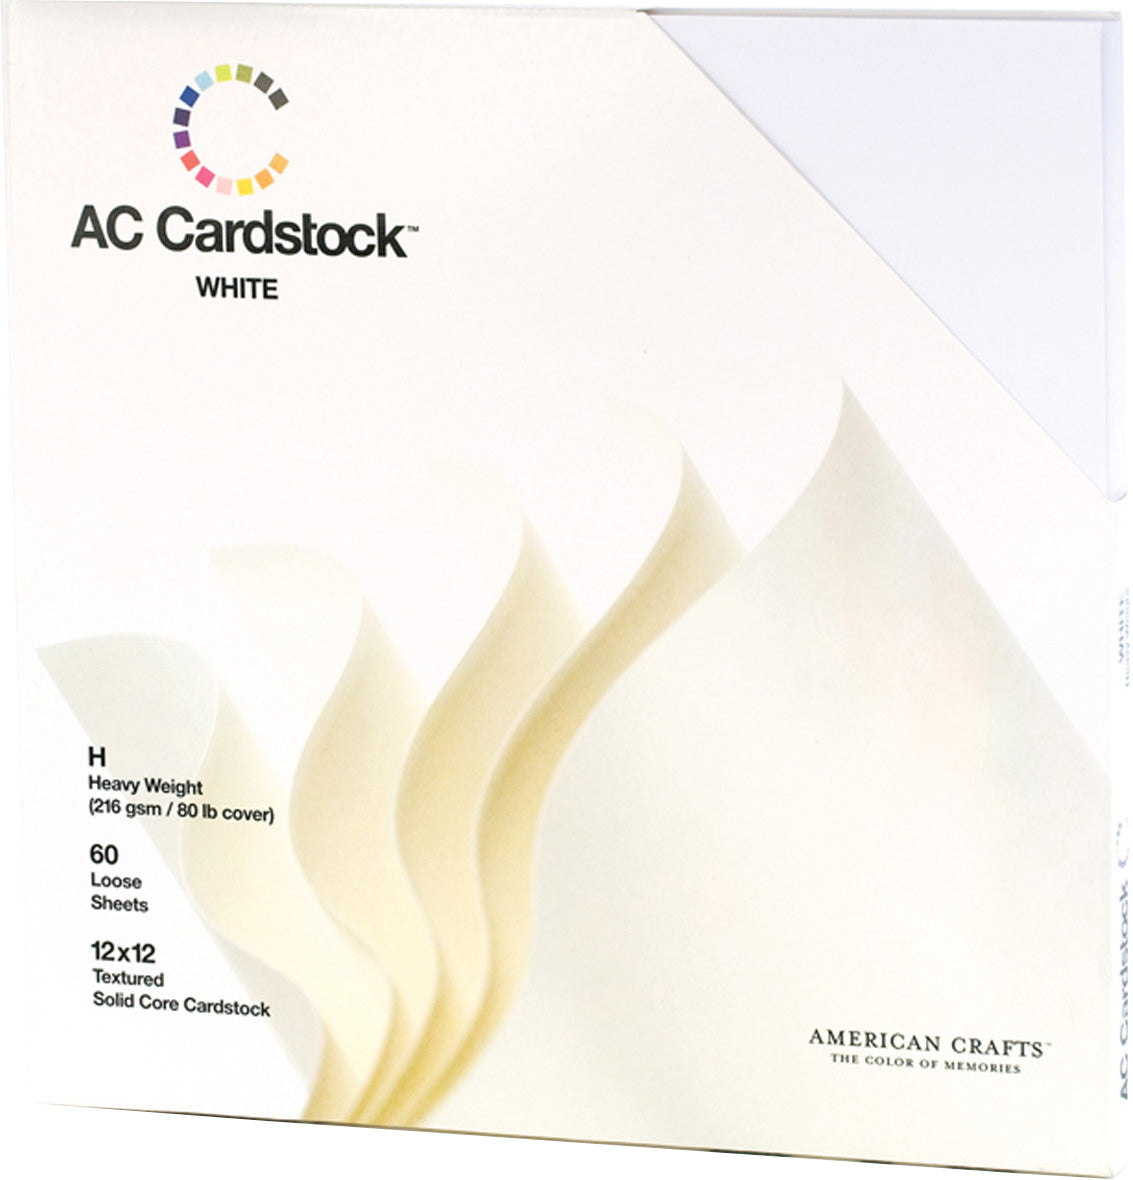 12 Packs: 100 ct. (1,200 total) White 6 x 6 Cardstock Paper by  Recollections™